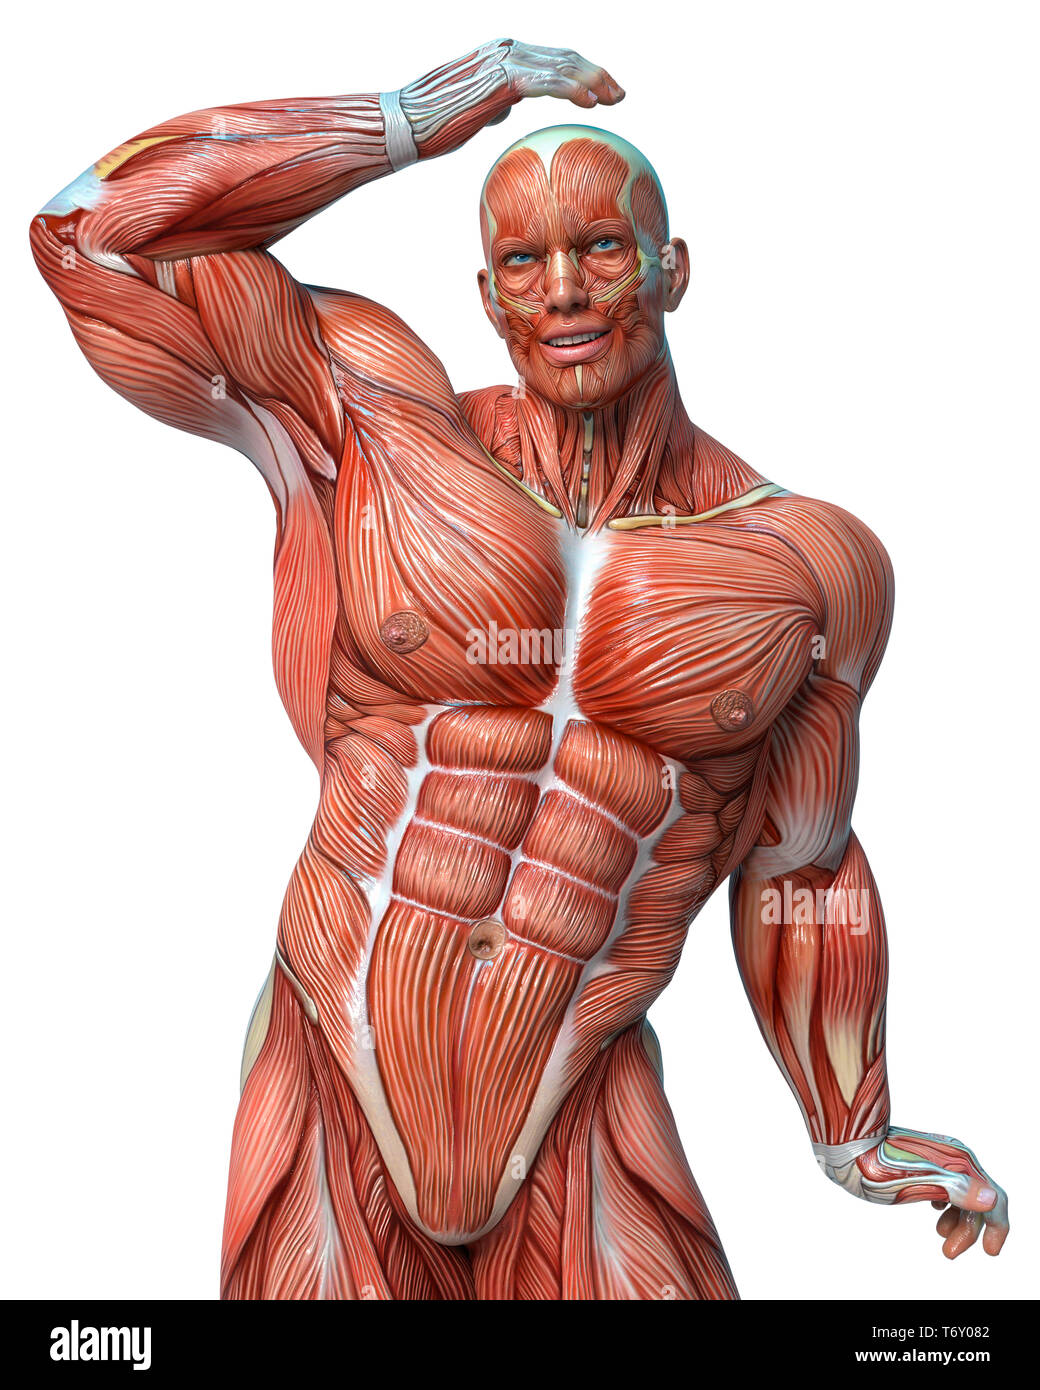 Man Anatomy’ : Male Anatomy Freedownload Zbrushcentral - Anatomy at earth's lab is a free virtual human anatomy portal with detailed models of all human body systems.